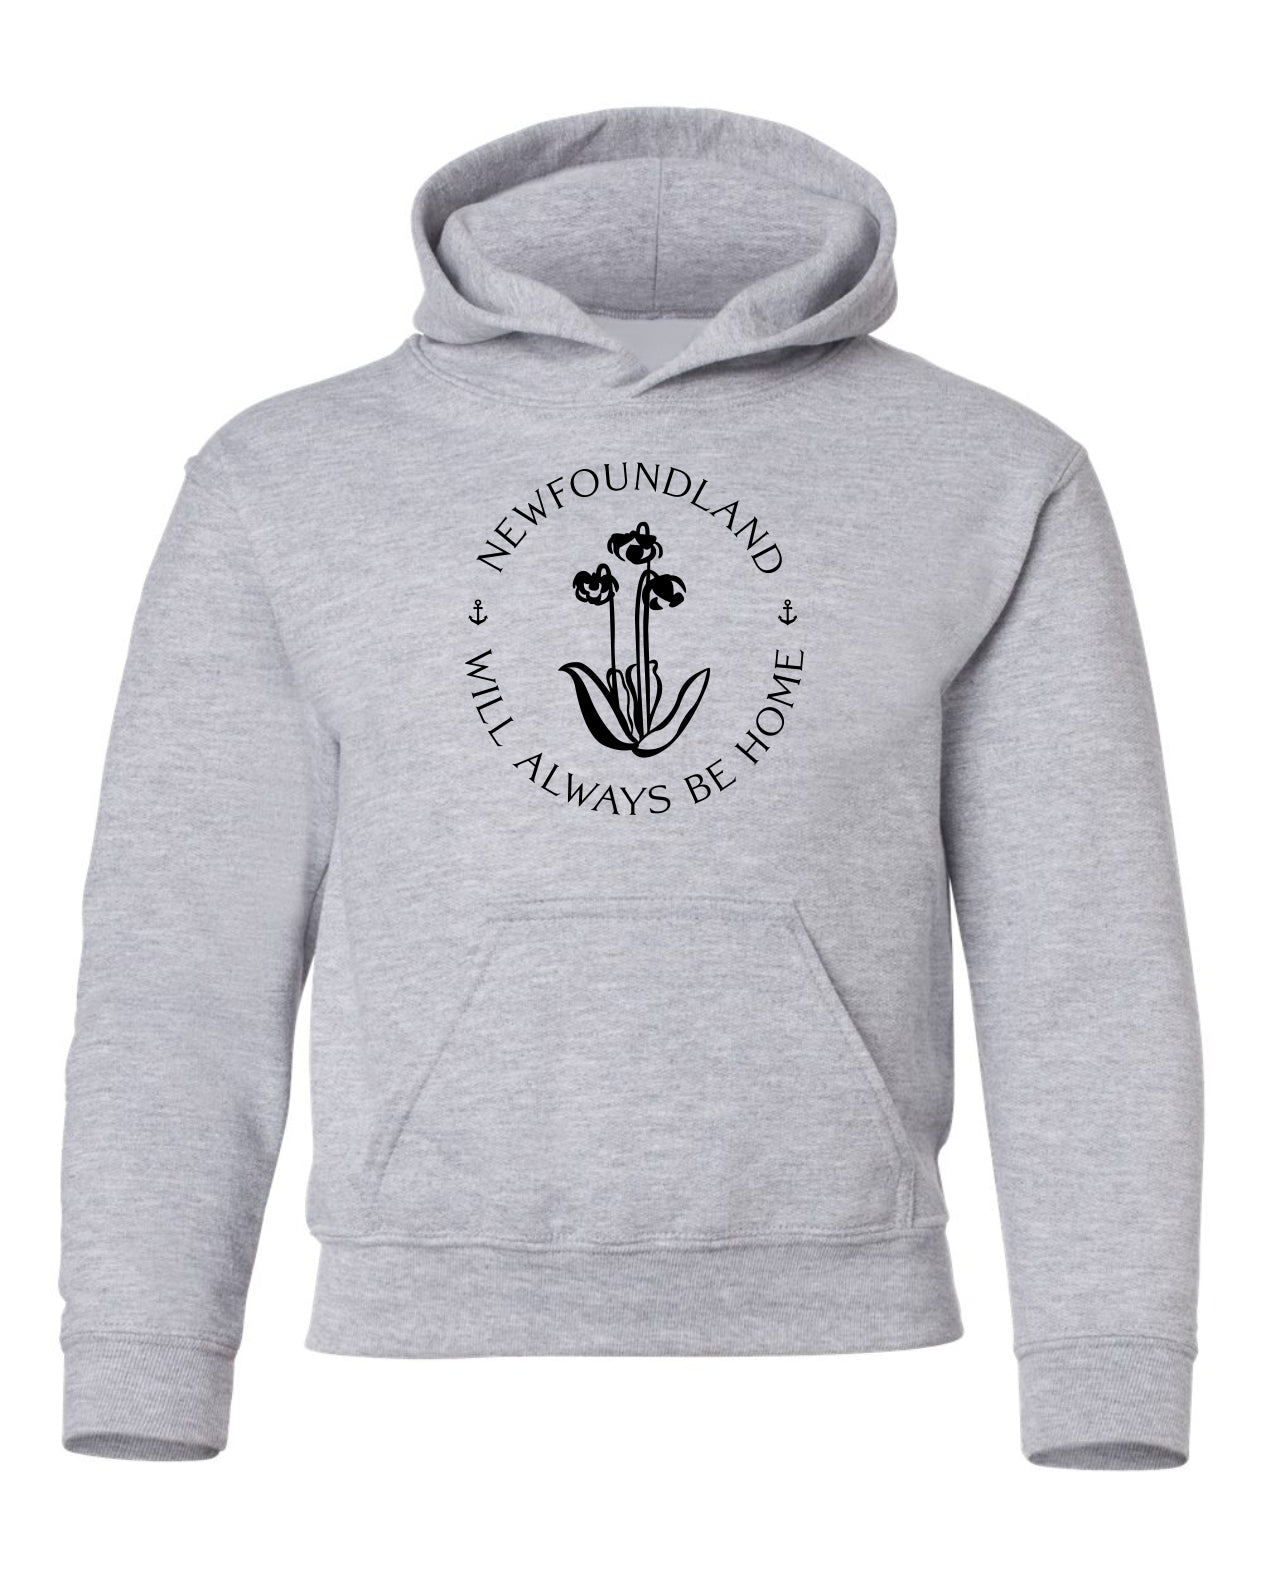 "Newfoundland Will Always Be Home" Youth Hoodie